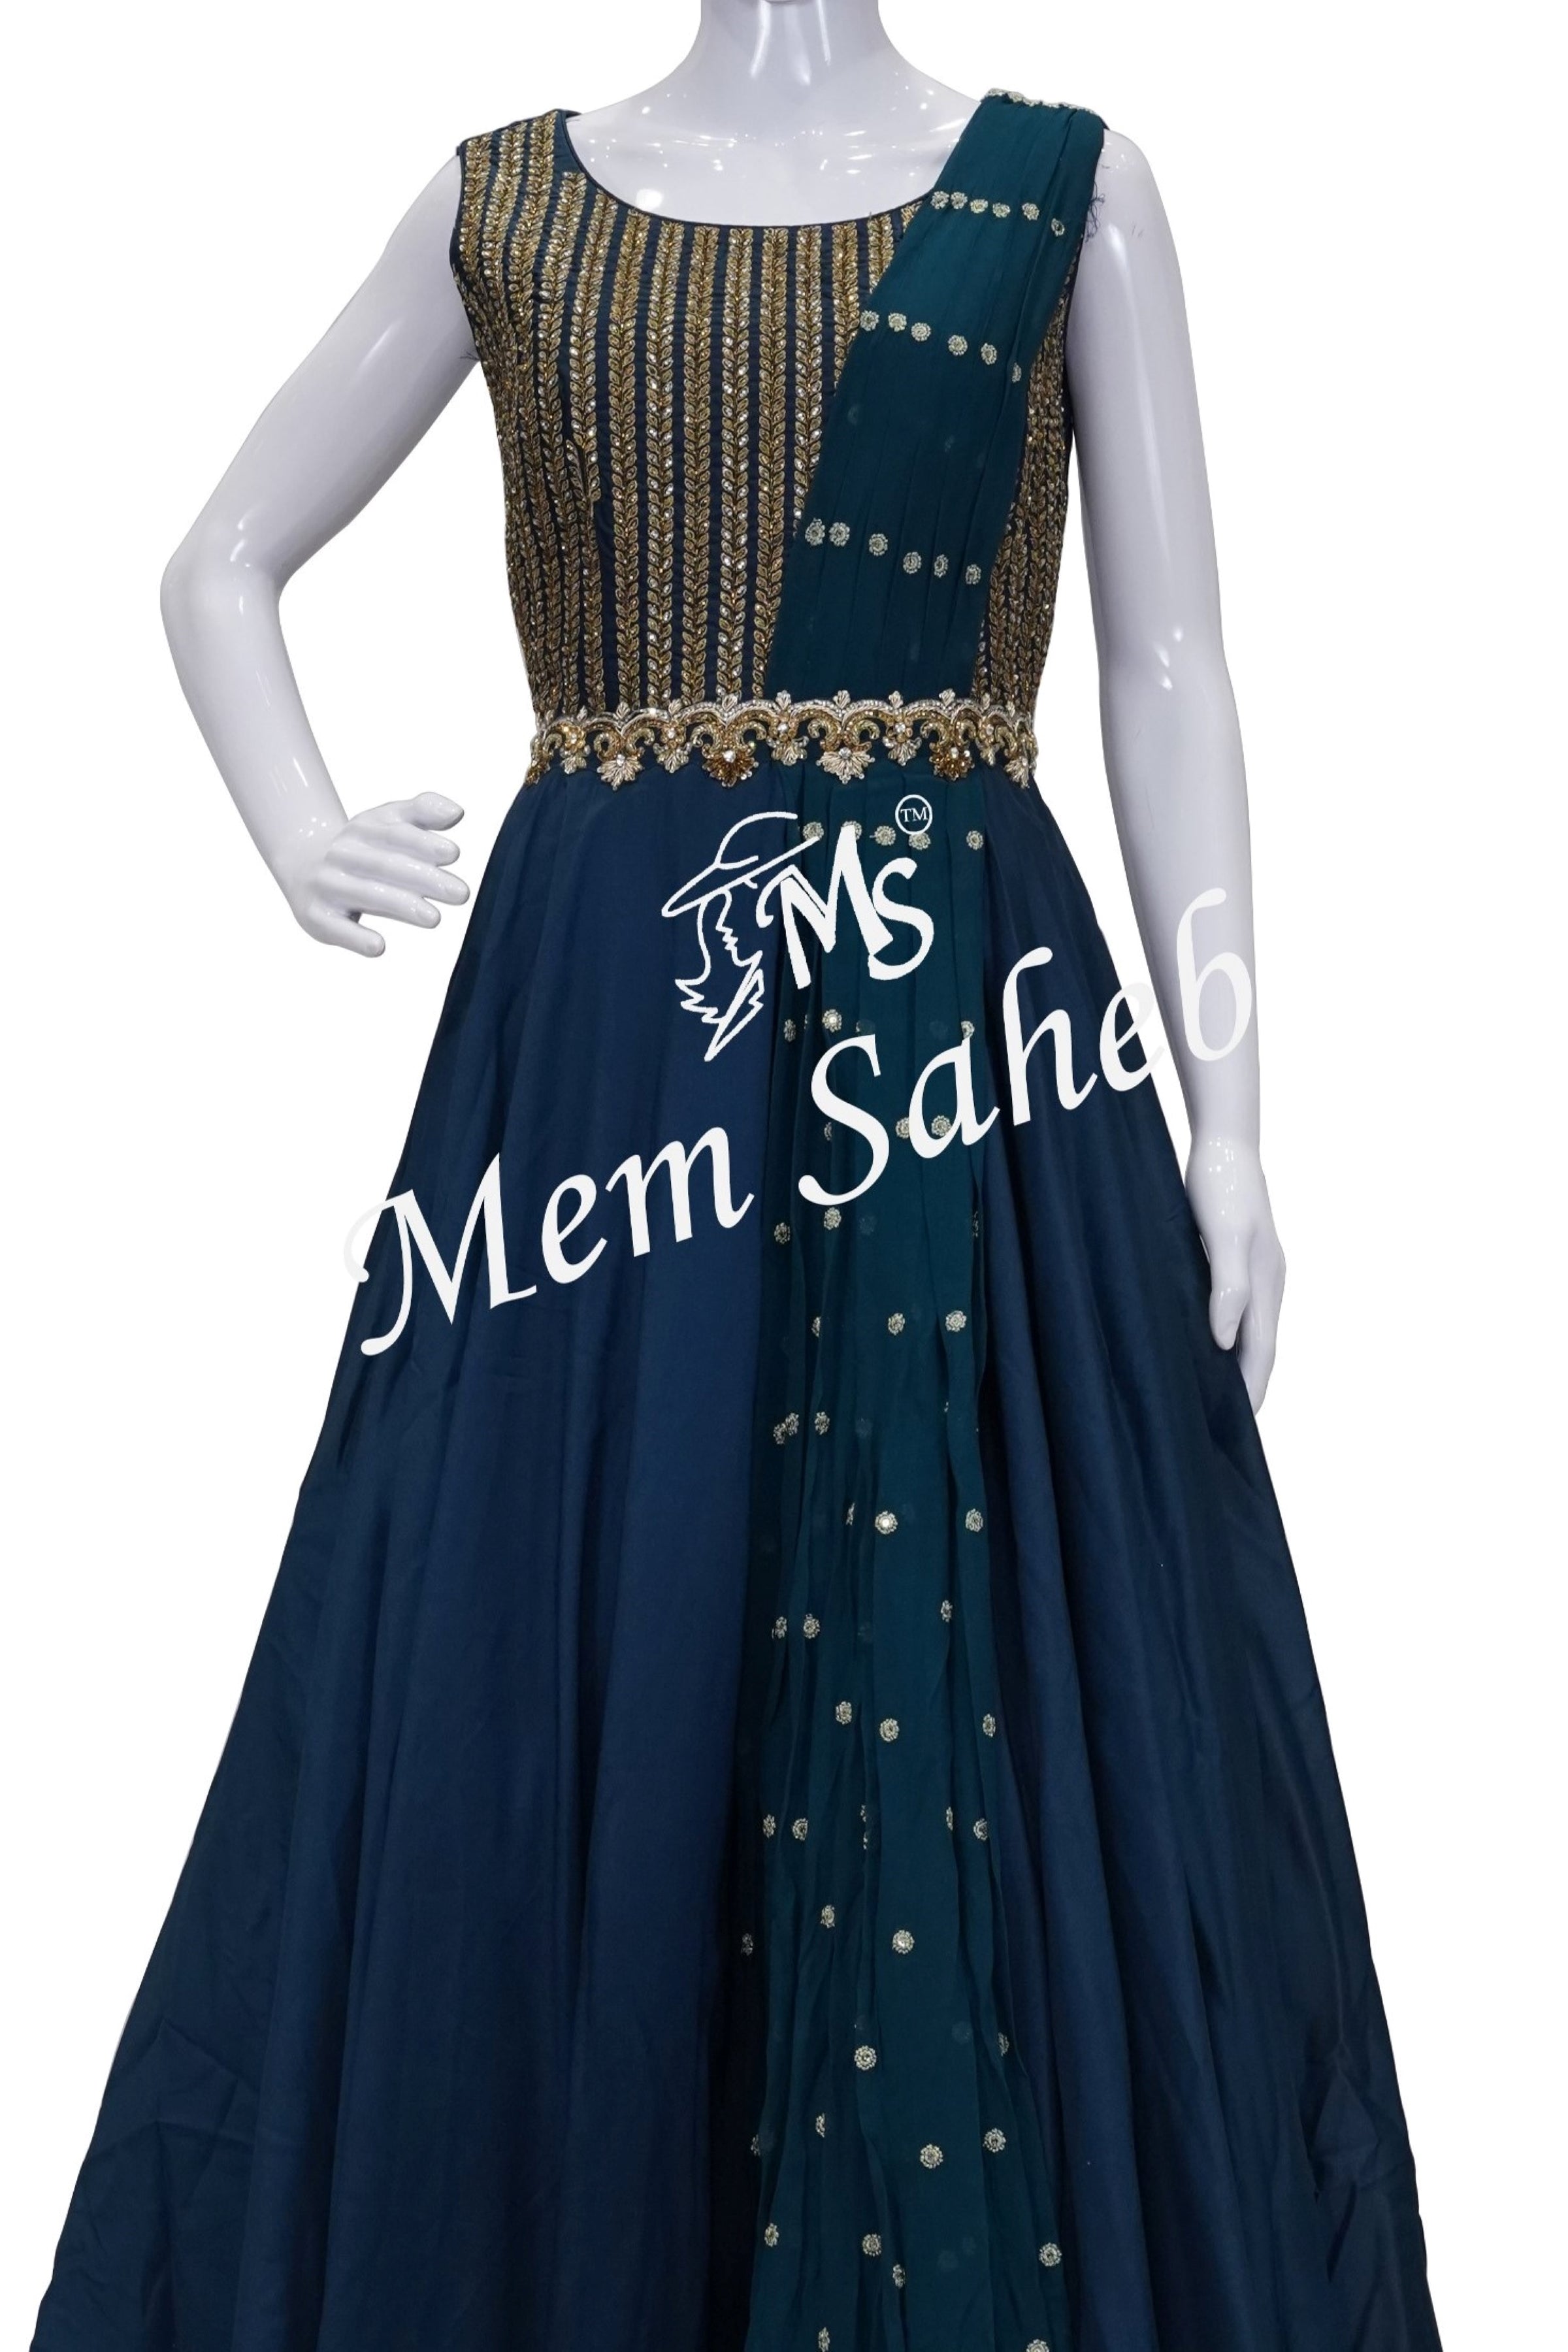 Buy Anarkali Gown With Dupatta for Wedding Indian Dress With Overcoat Best  Seller Pakistani Clothes Marriage Guest Attire Summer Wedding Ethnic Online  in India … | Indian fashion dresses, Designer party wear